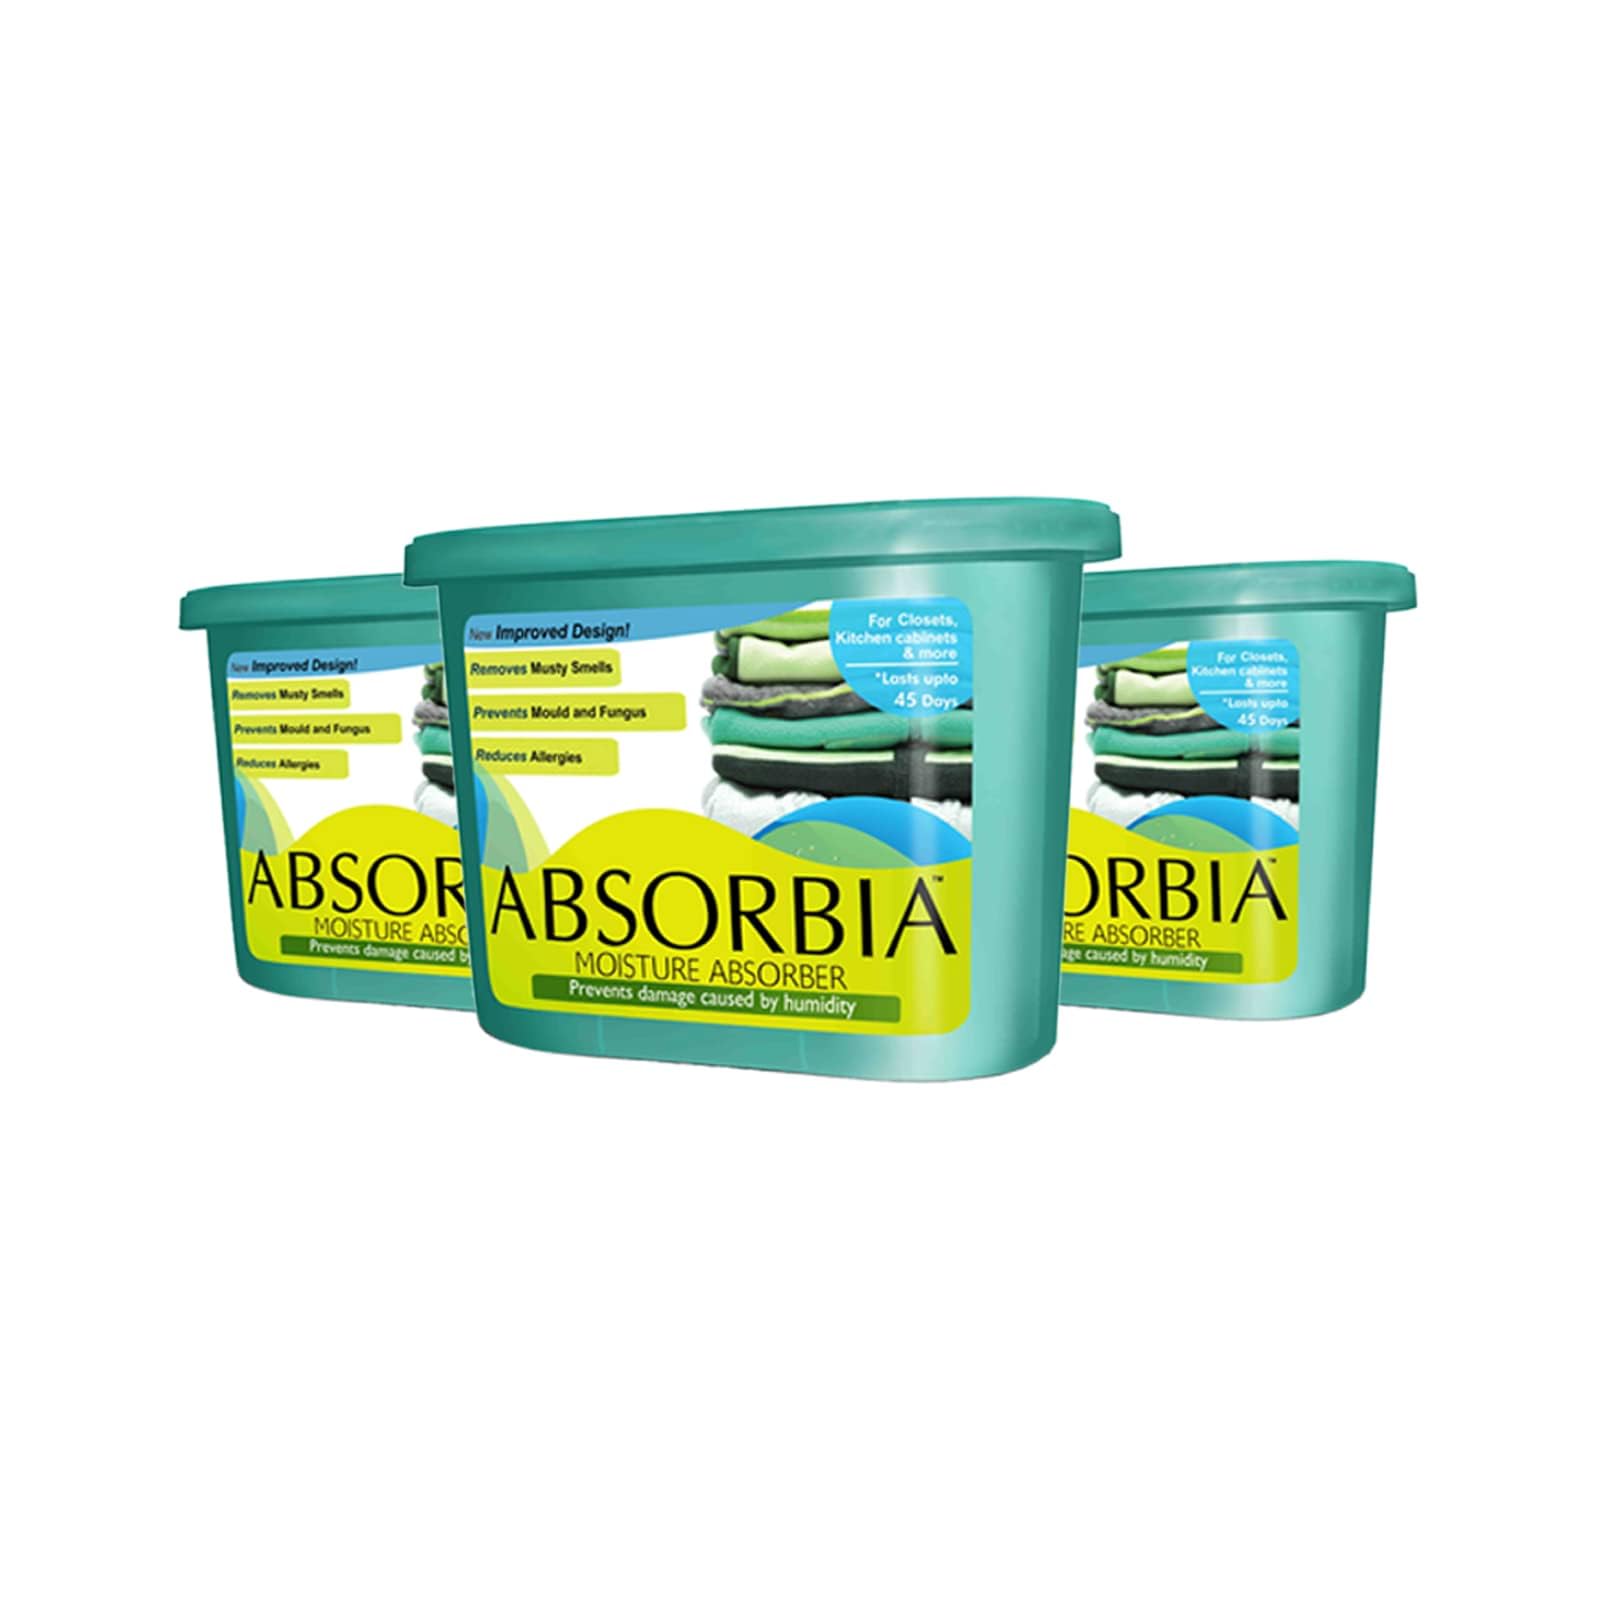 Absorbia Moisture Absorber | Absorbia Classic - Family Pack of 3 X 5(600ml Each) | Dehumidier for Wardrobe, Cupboards & Closets | Fights Against Moisture, Mould, Fungus & Musty smells